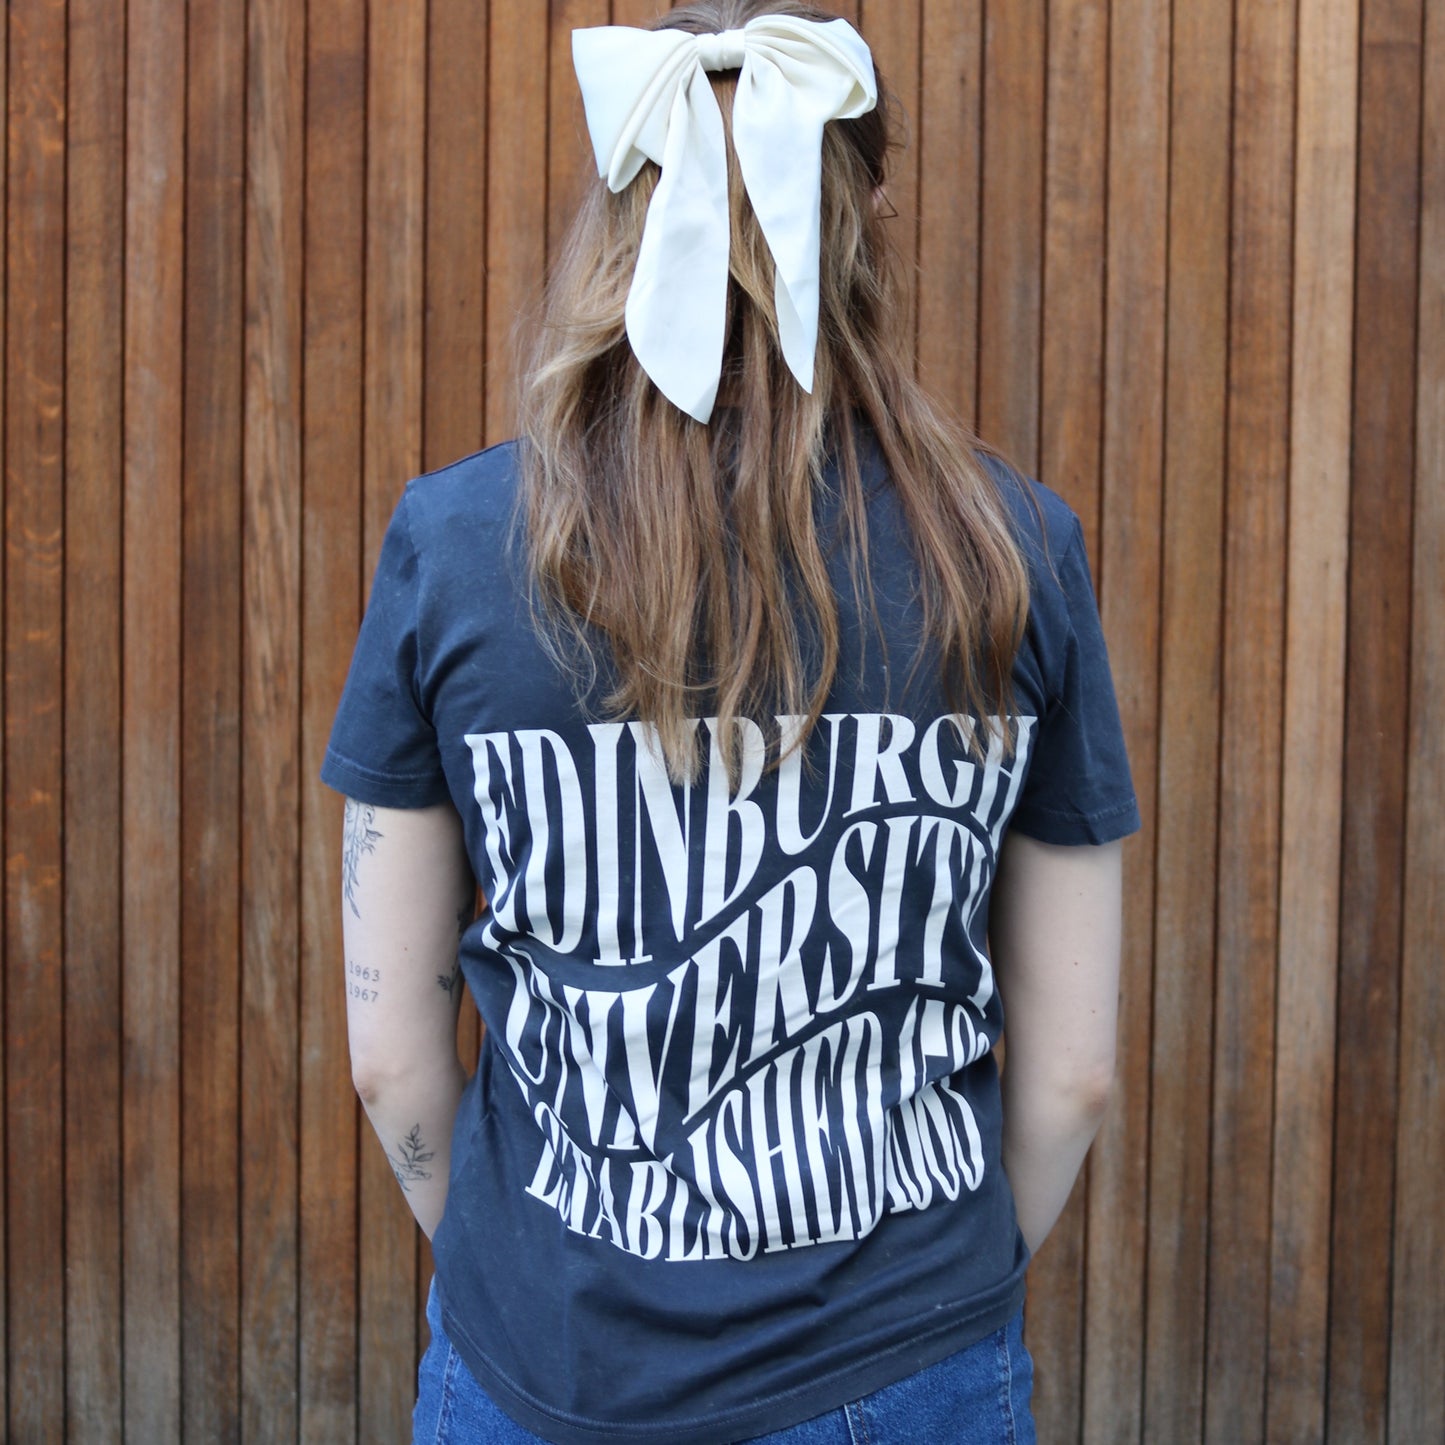 Kirstie modelling the back of the distressed charcoal vintage tee shirt. 'Edinburgh University Established 1583' text is printed in white and in a wavy pattern across the back of the shirt.